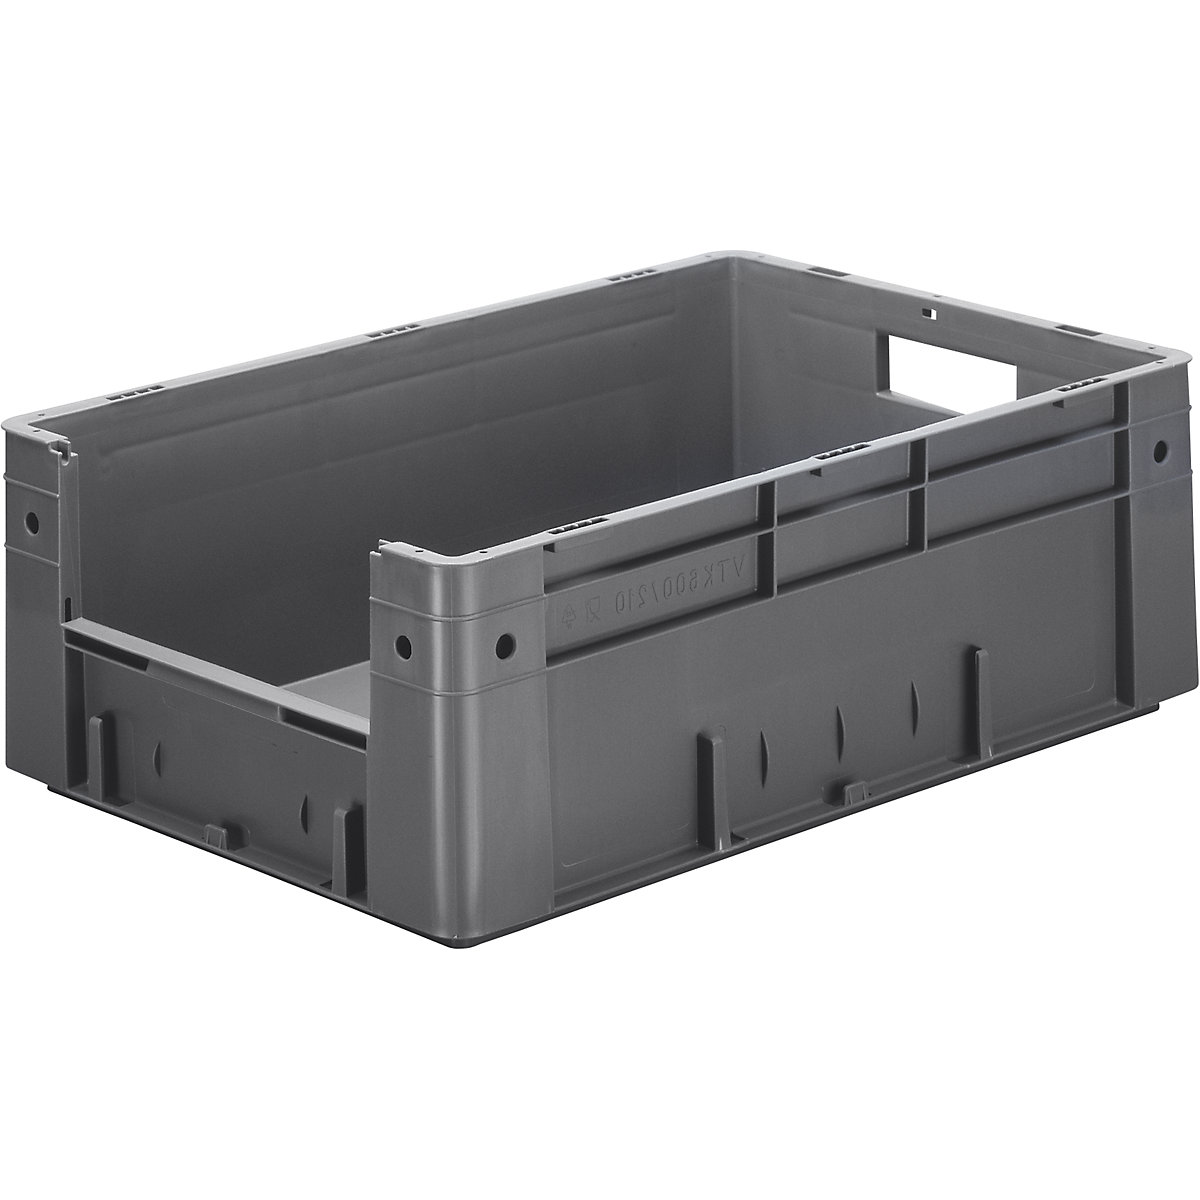 Euro stacking container, capacity 38 l, LxWxH 600 x 400 x 210 mm, pack of 2, grey-5